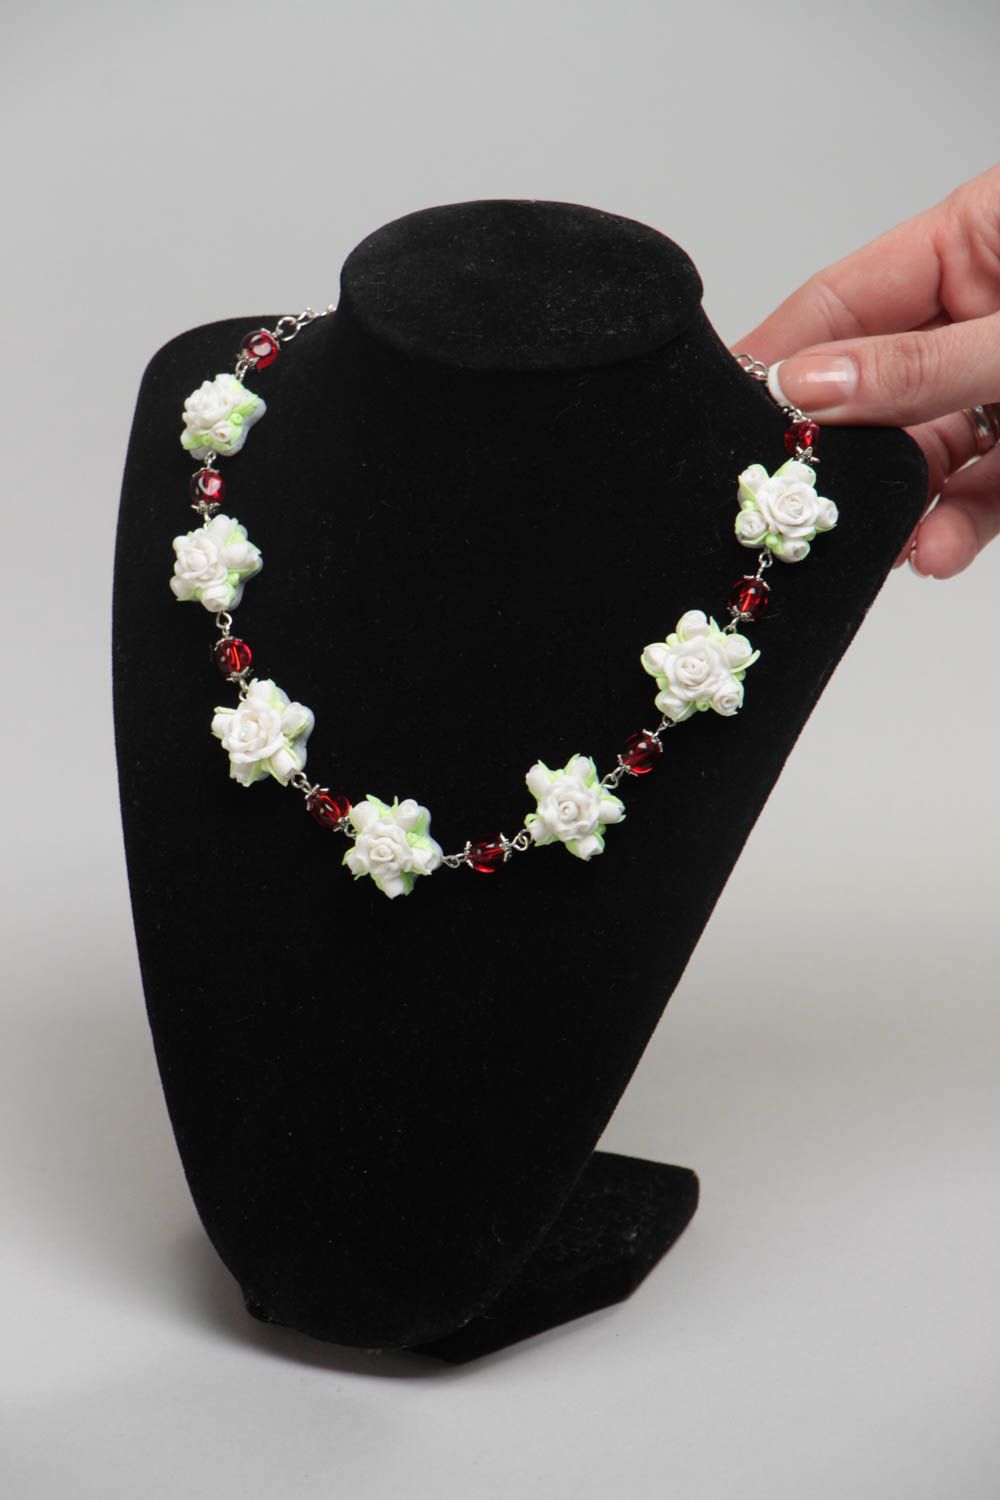 Necklace made of polymer clay with white roses handmade designer jewelry photo 5